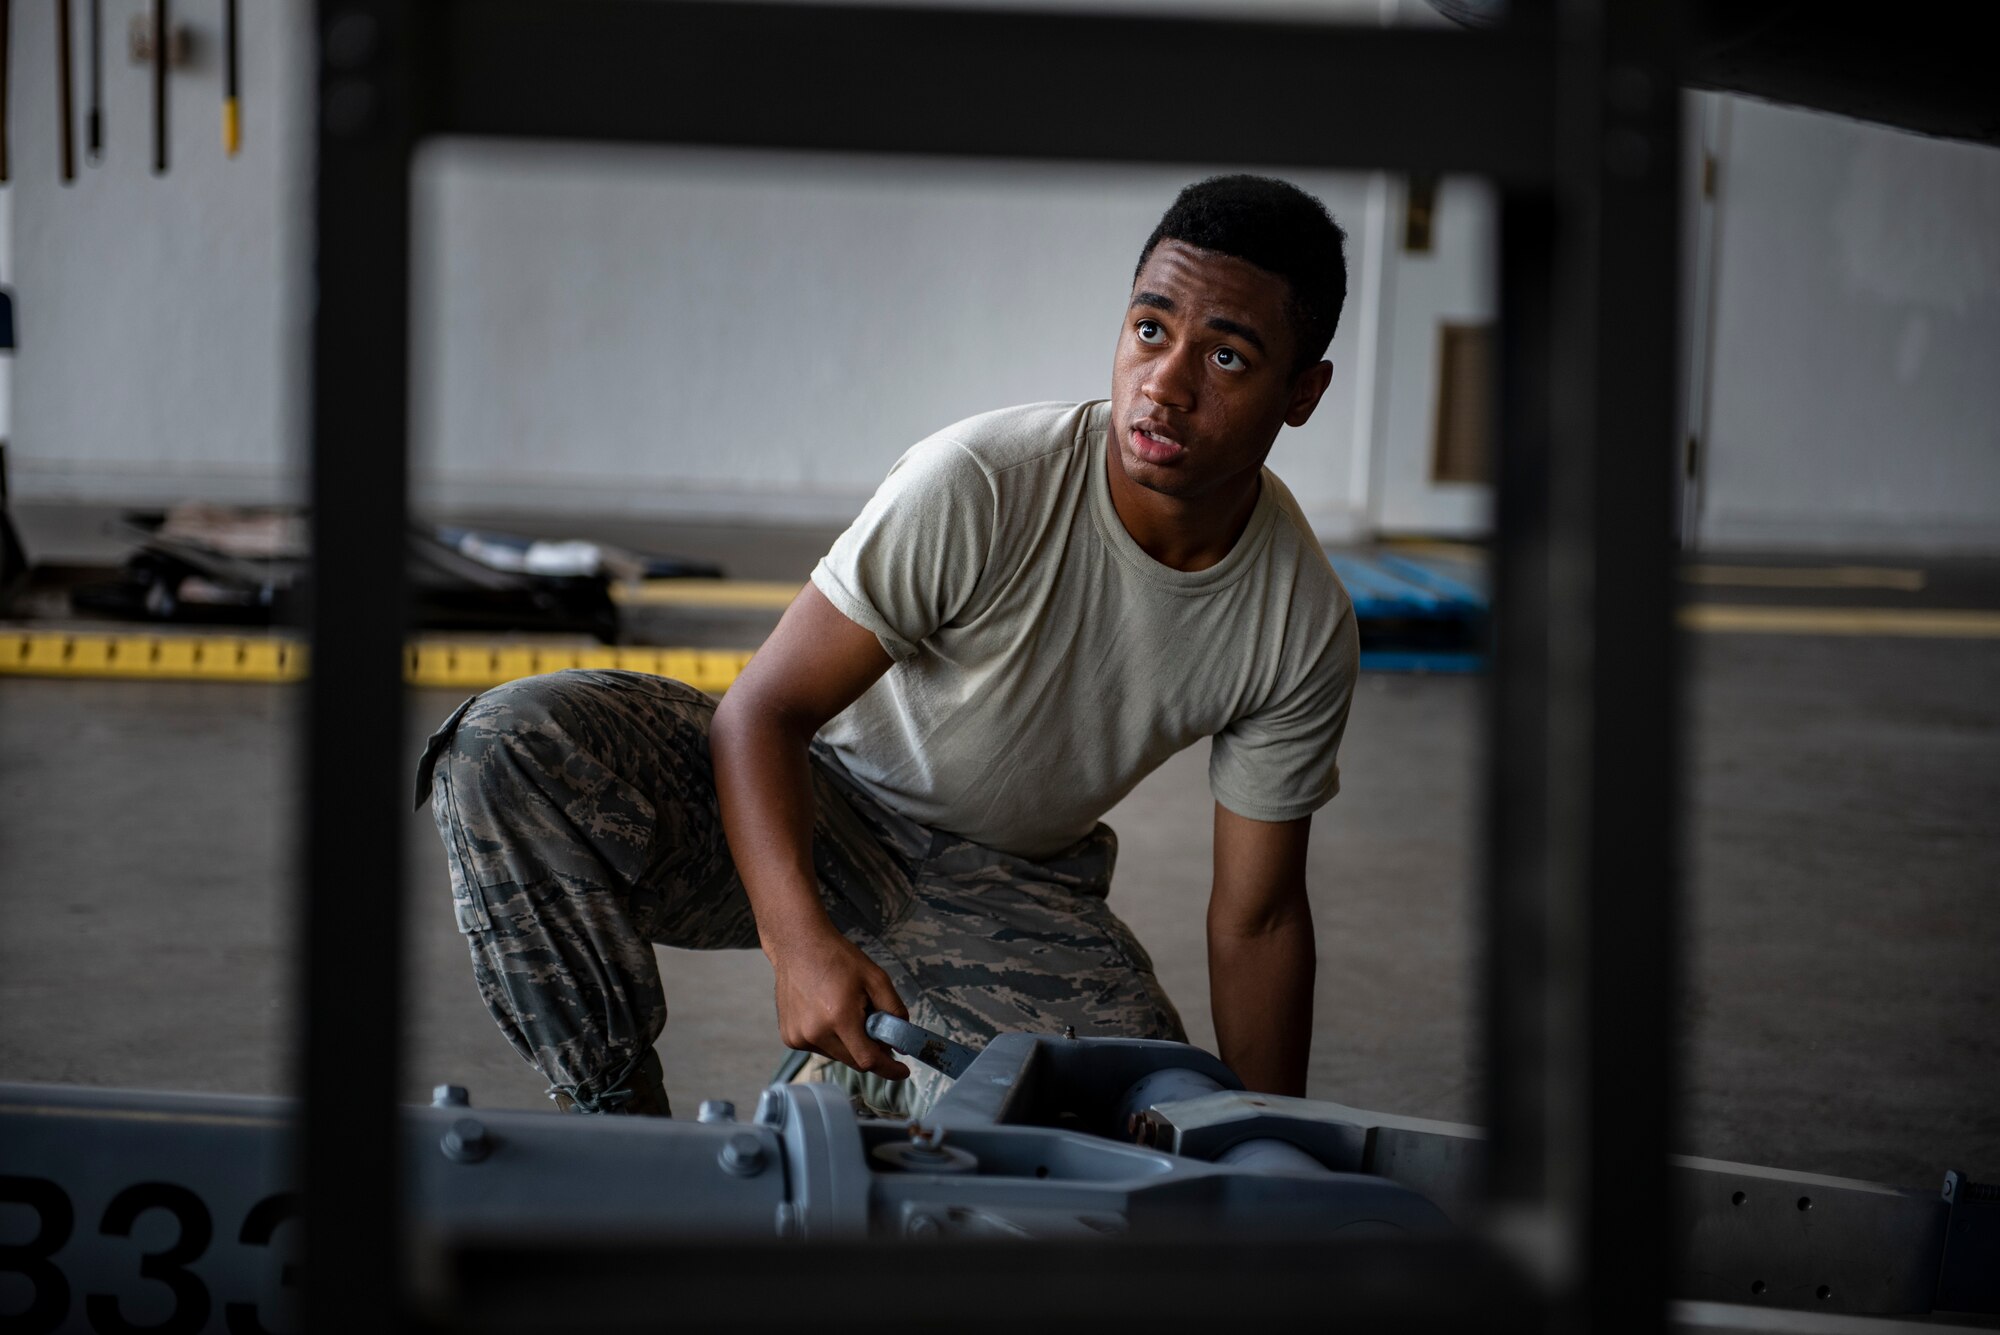 Airman Anthony Washington, 362nd Training Squadron F-16 crew chief apprentice course student, connects a tow bar at Sheppard Air Force Base, Texas, July 2, 2019. Washington enjoys being able to work on aircraft, especially the F-16 Fighting Falcon as he thinks it is the second best plane, right behind the A-10 Warthog. (U.S. Air Force photo by Airman 1st Class Pedro Tenorio)